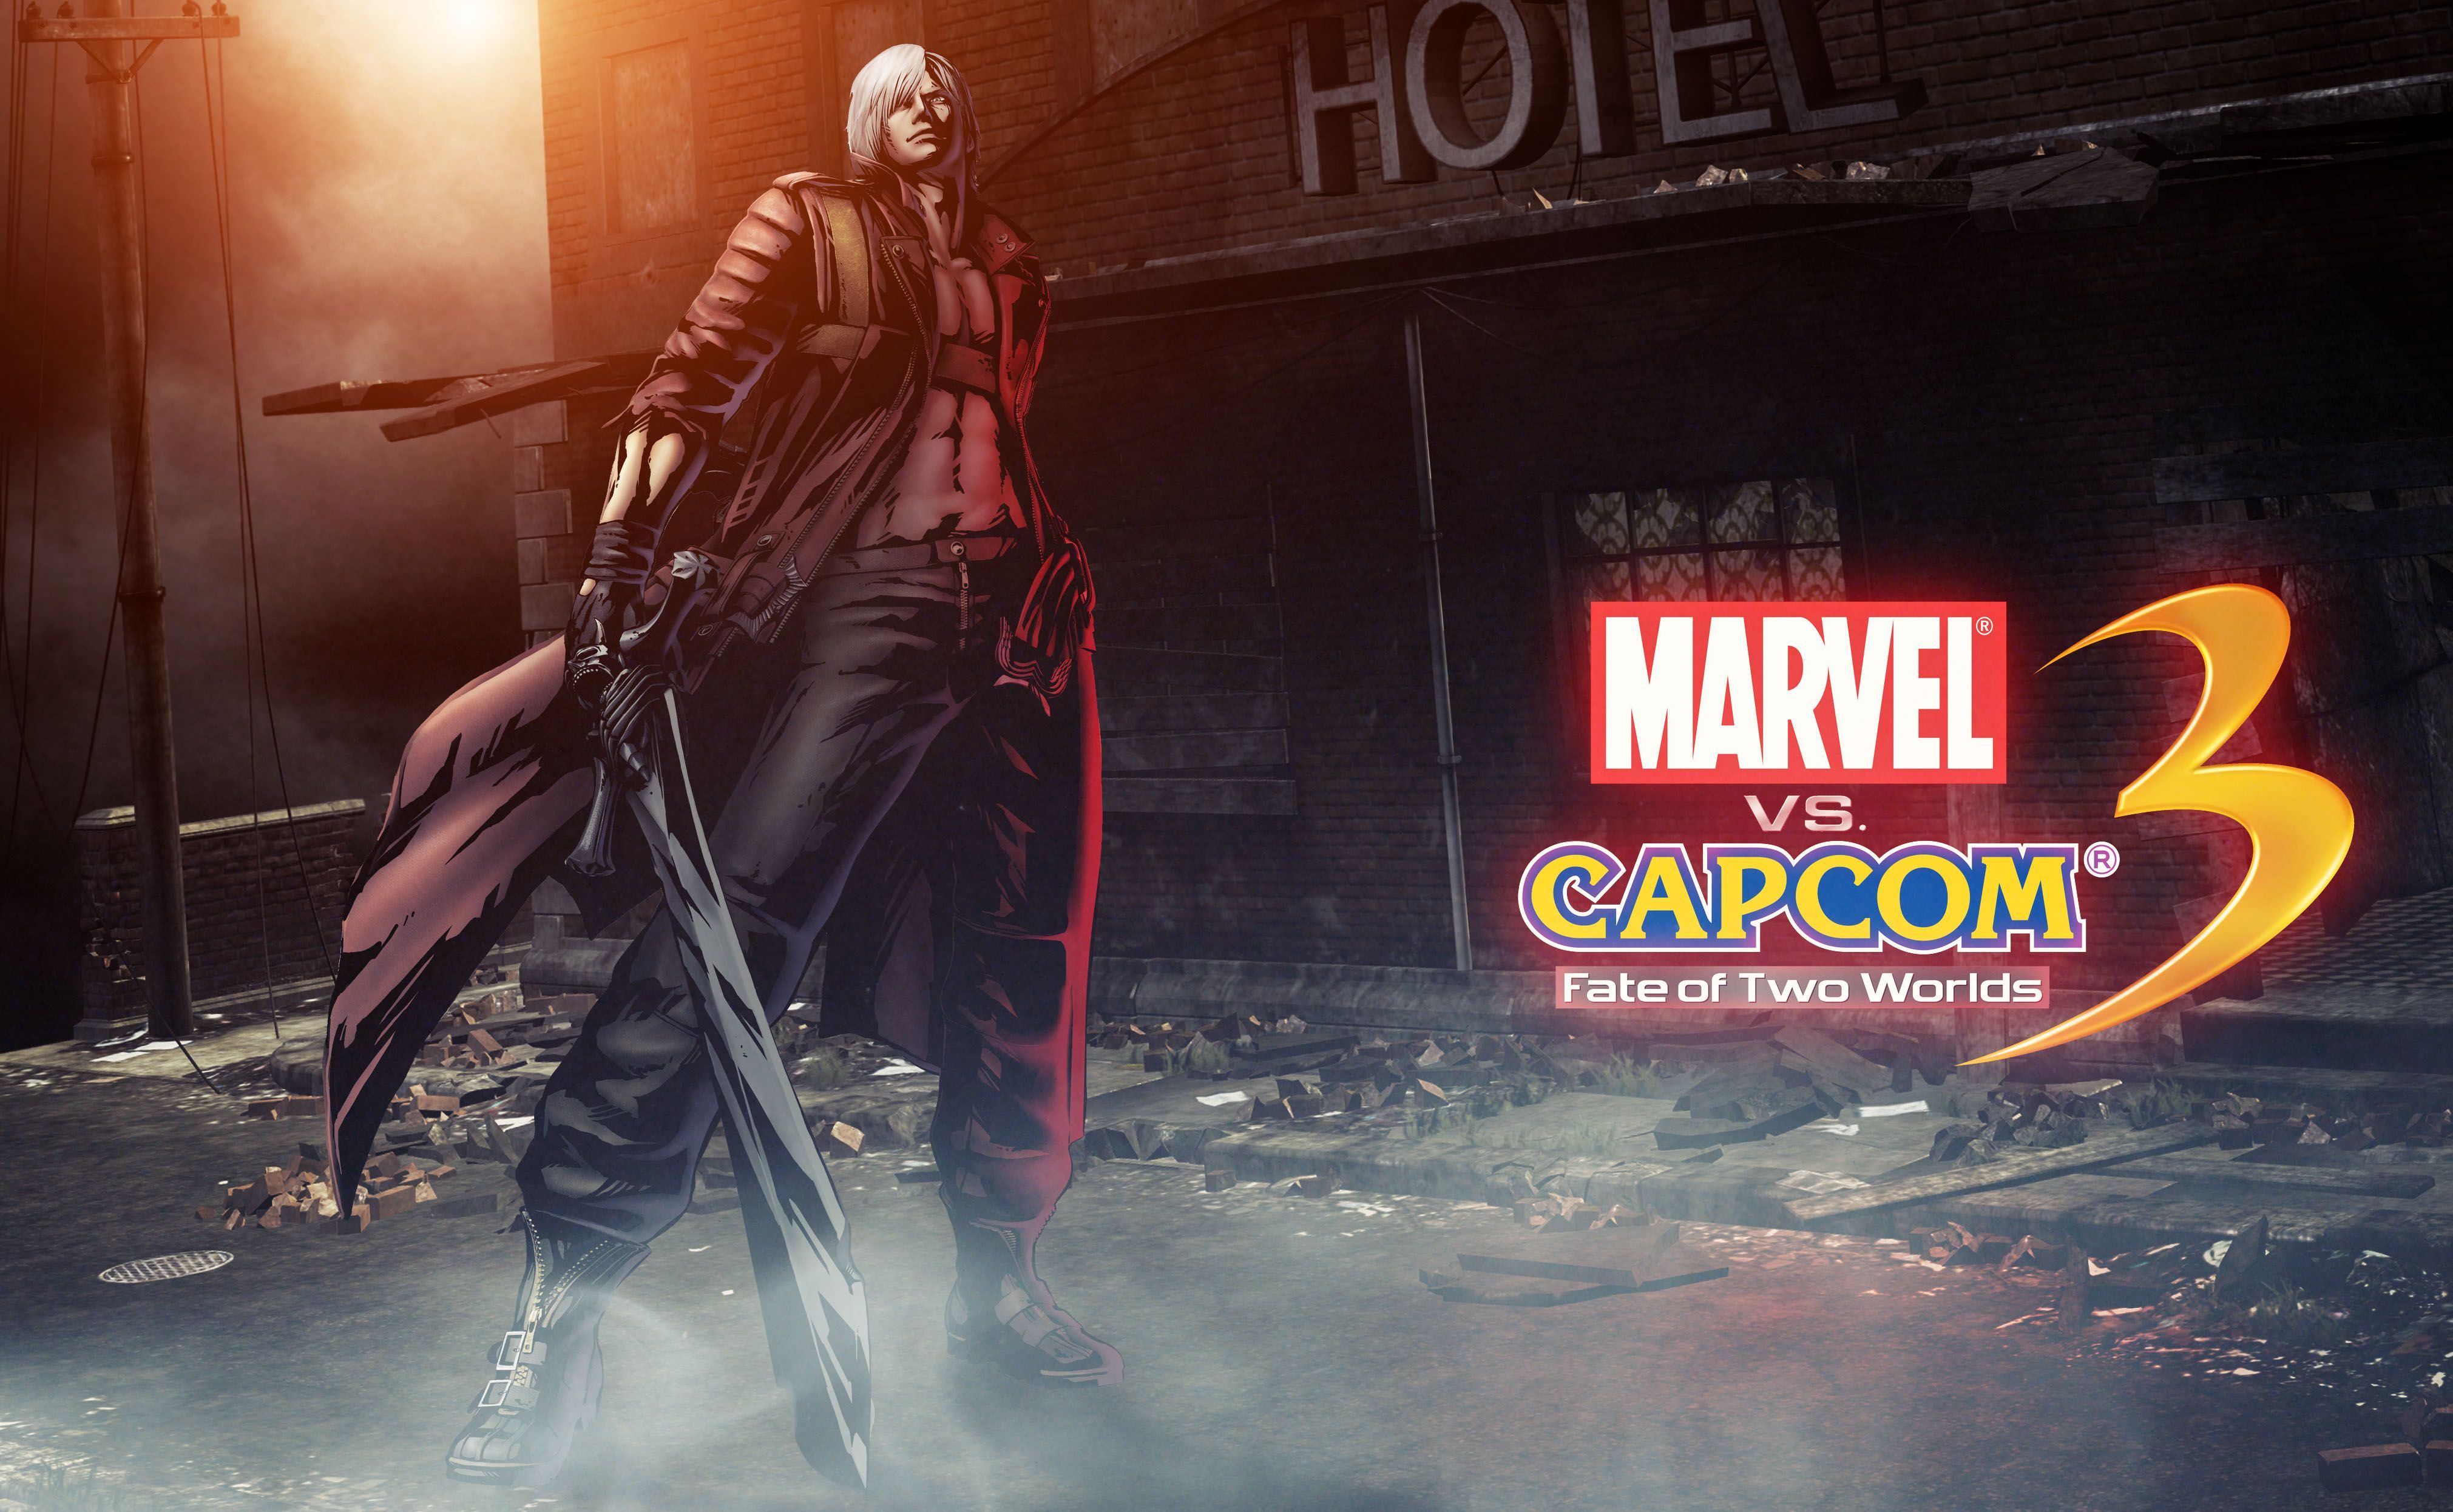 Image: Dante, demon, sword, Rebellion, cloak, building, hotel, Devil May Cry 3, Fate of Two Worlds, Marvel, Capcom, game